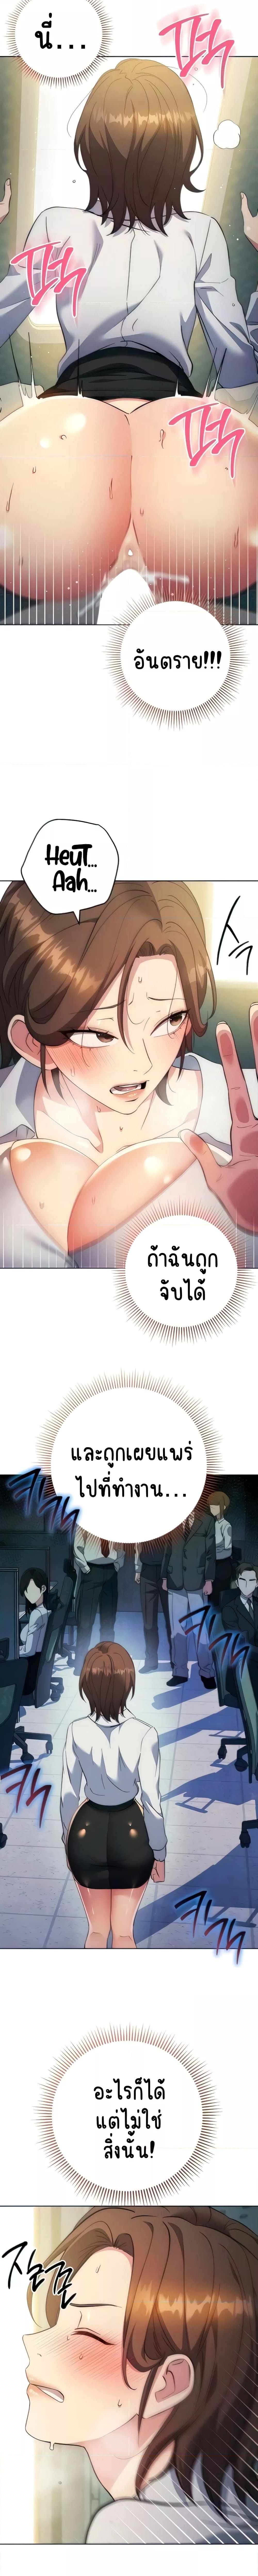 Outsider: The Invisible Man ตอนที่ 10 ภาพ 4